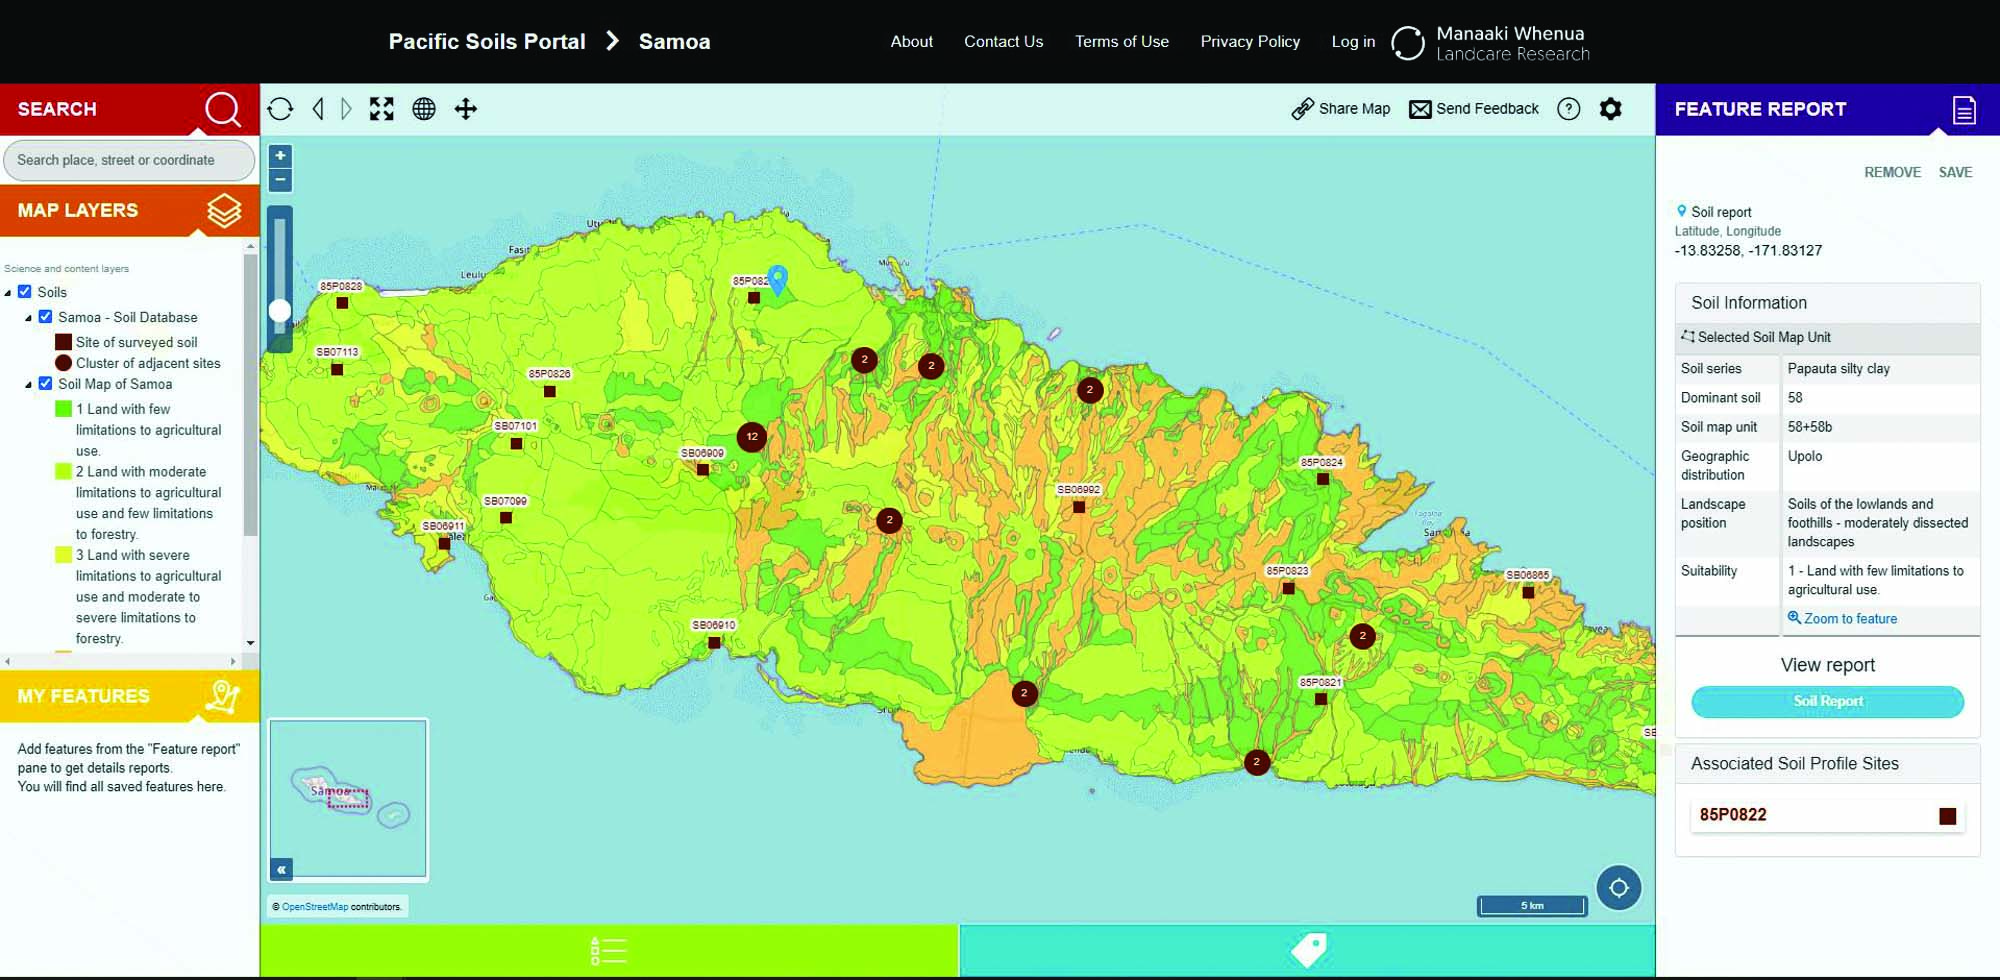 Screen grab of Samoan sites in the Pacific Soils Portal